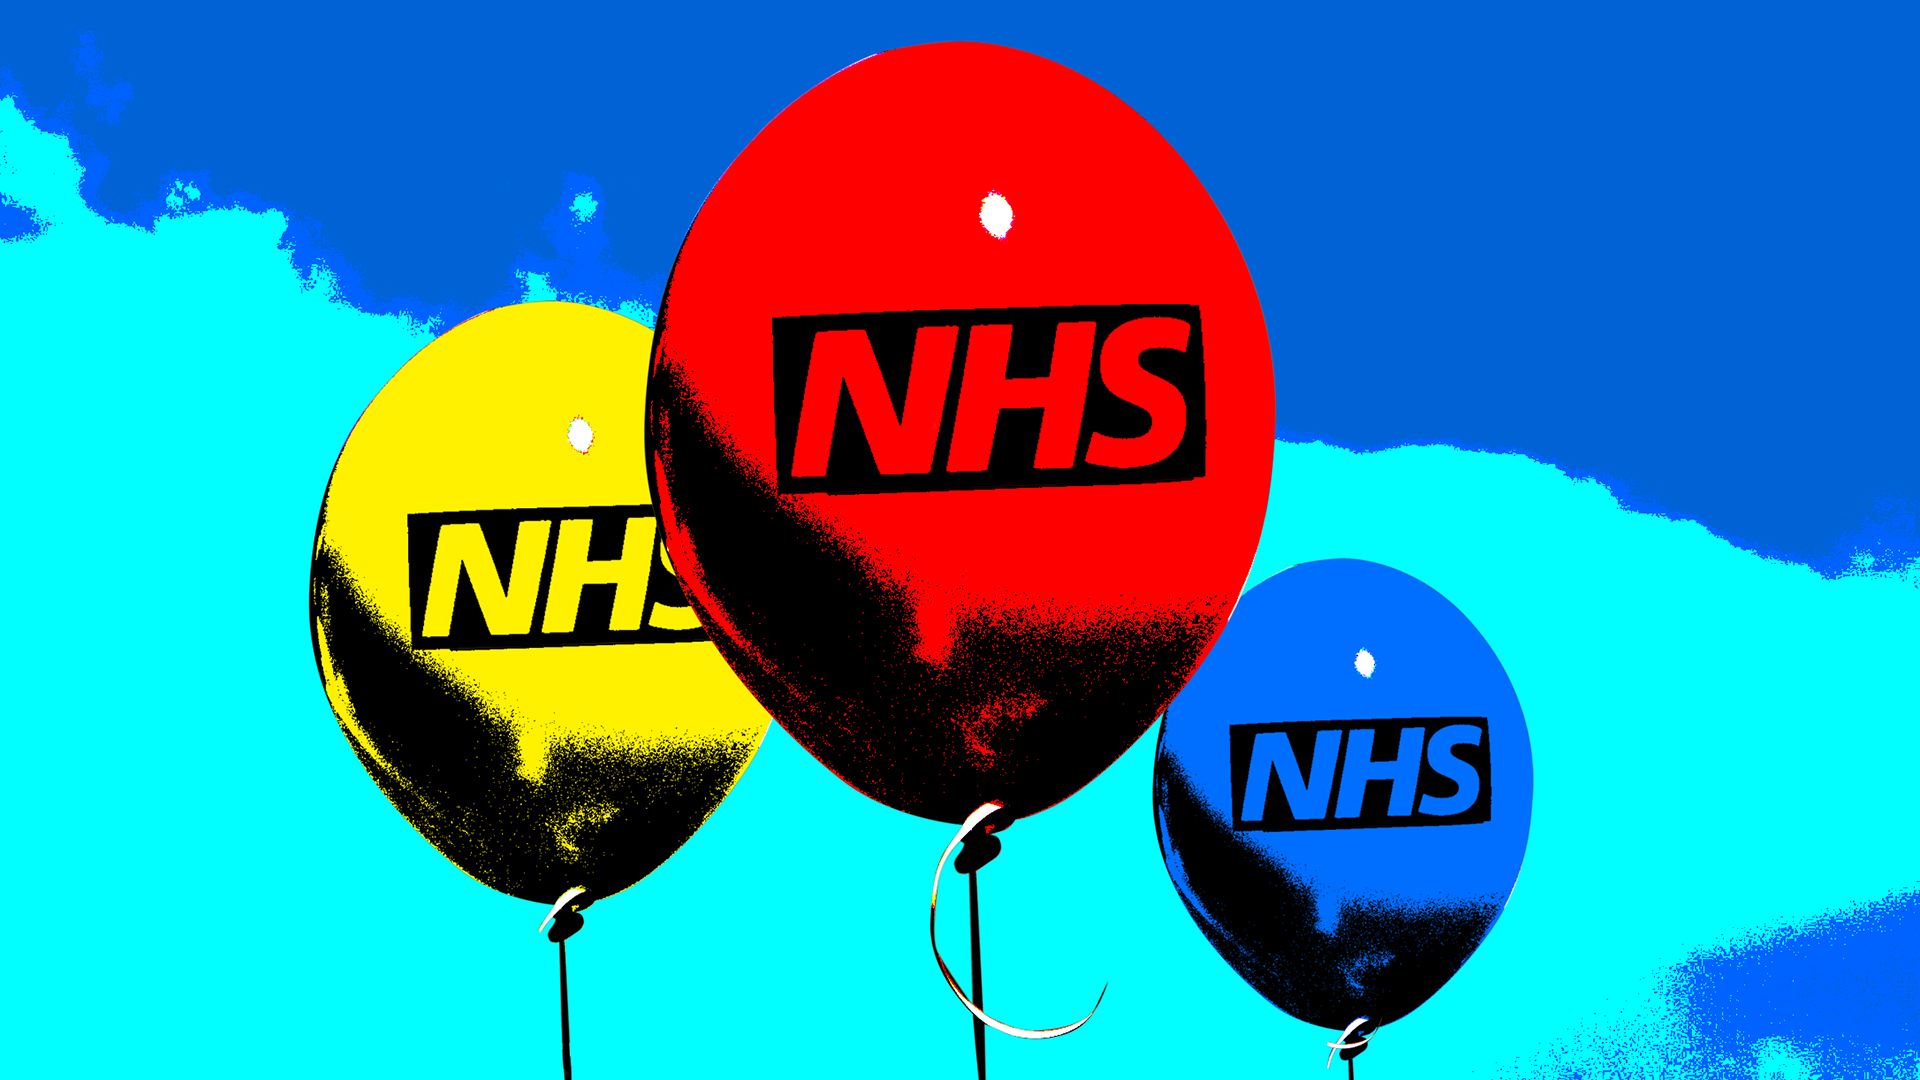 Coloured balloons with NHS written on them